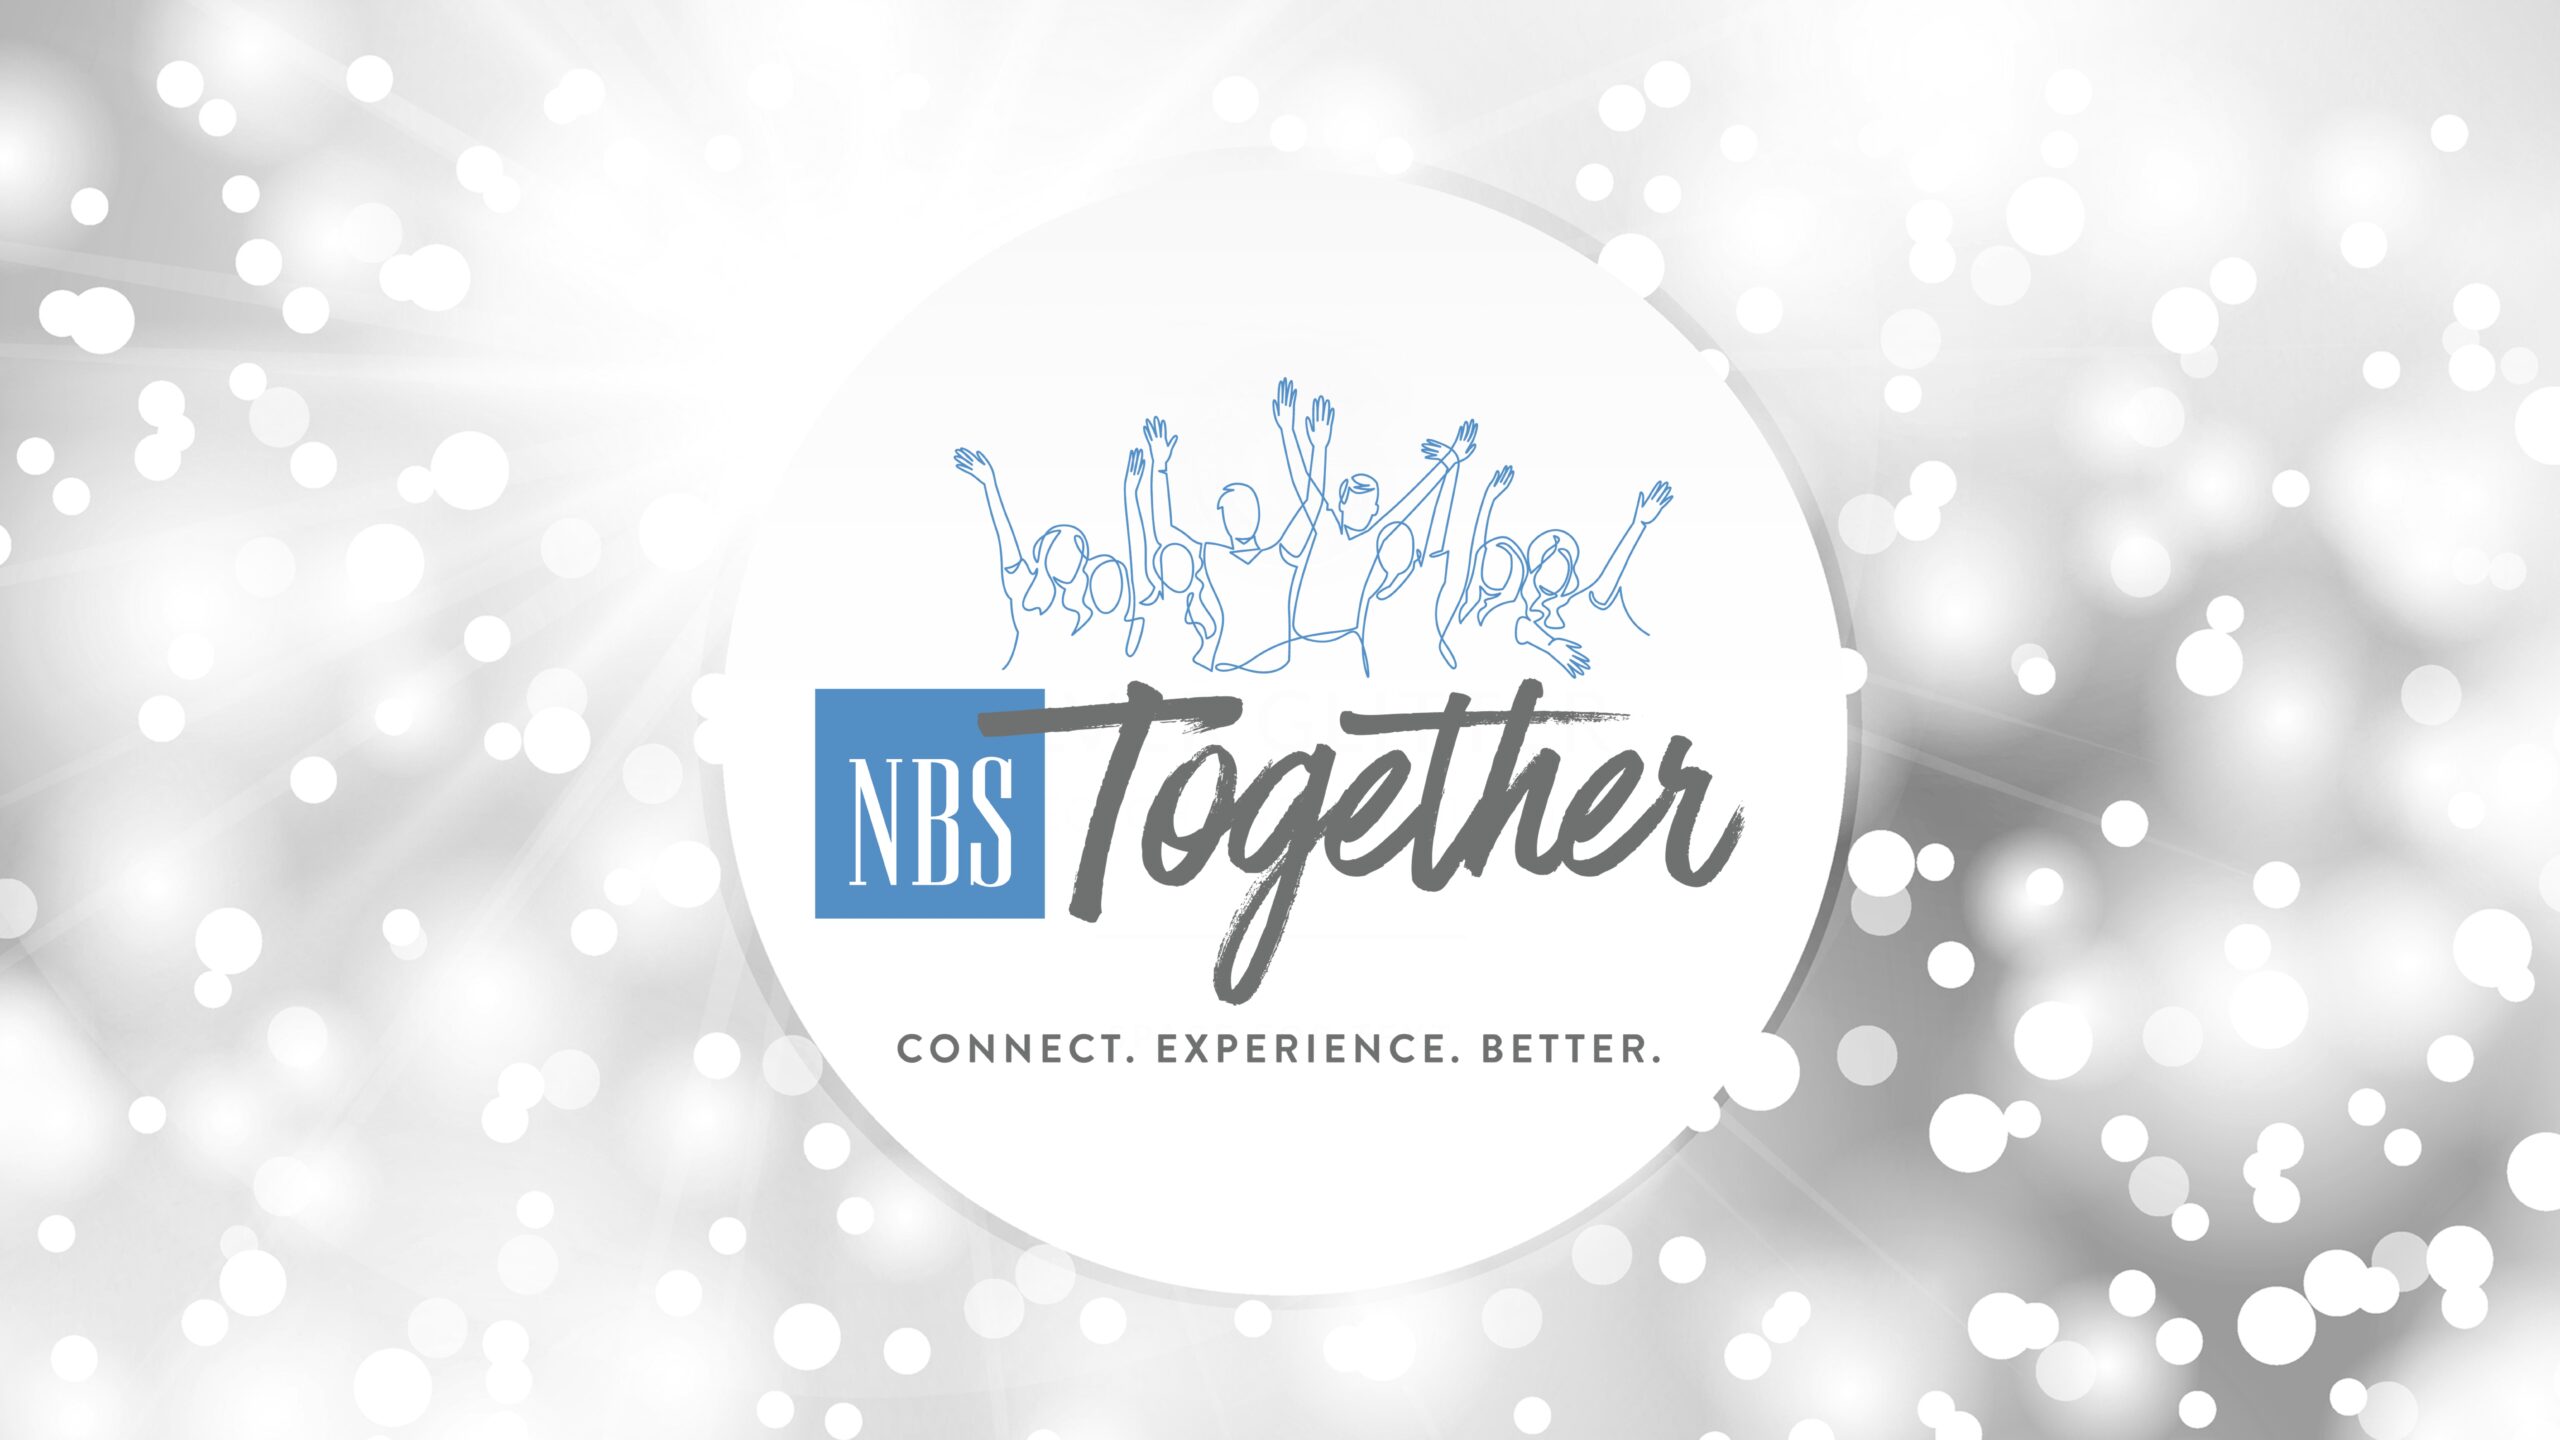 NBS Year of Togetherness